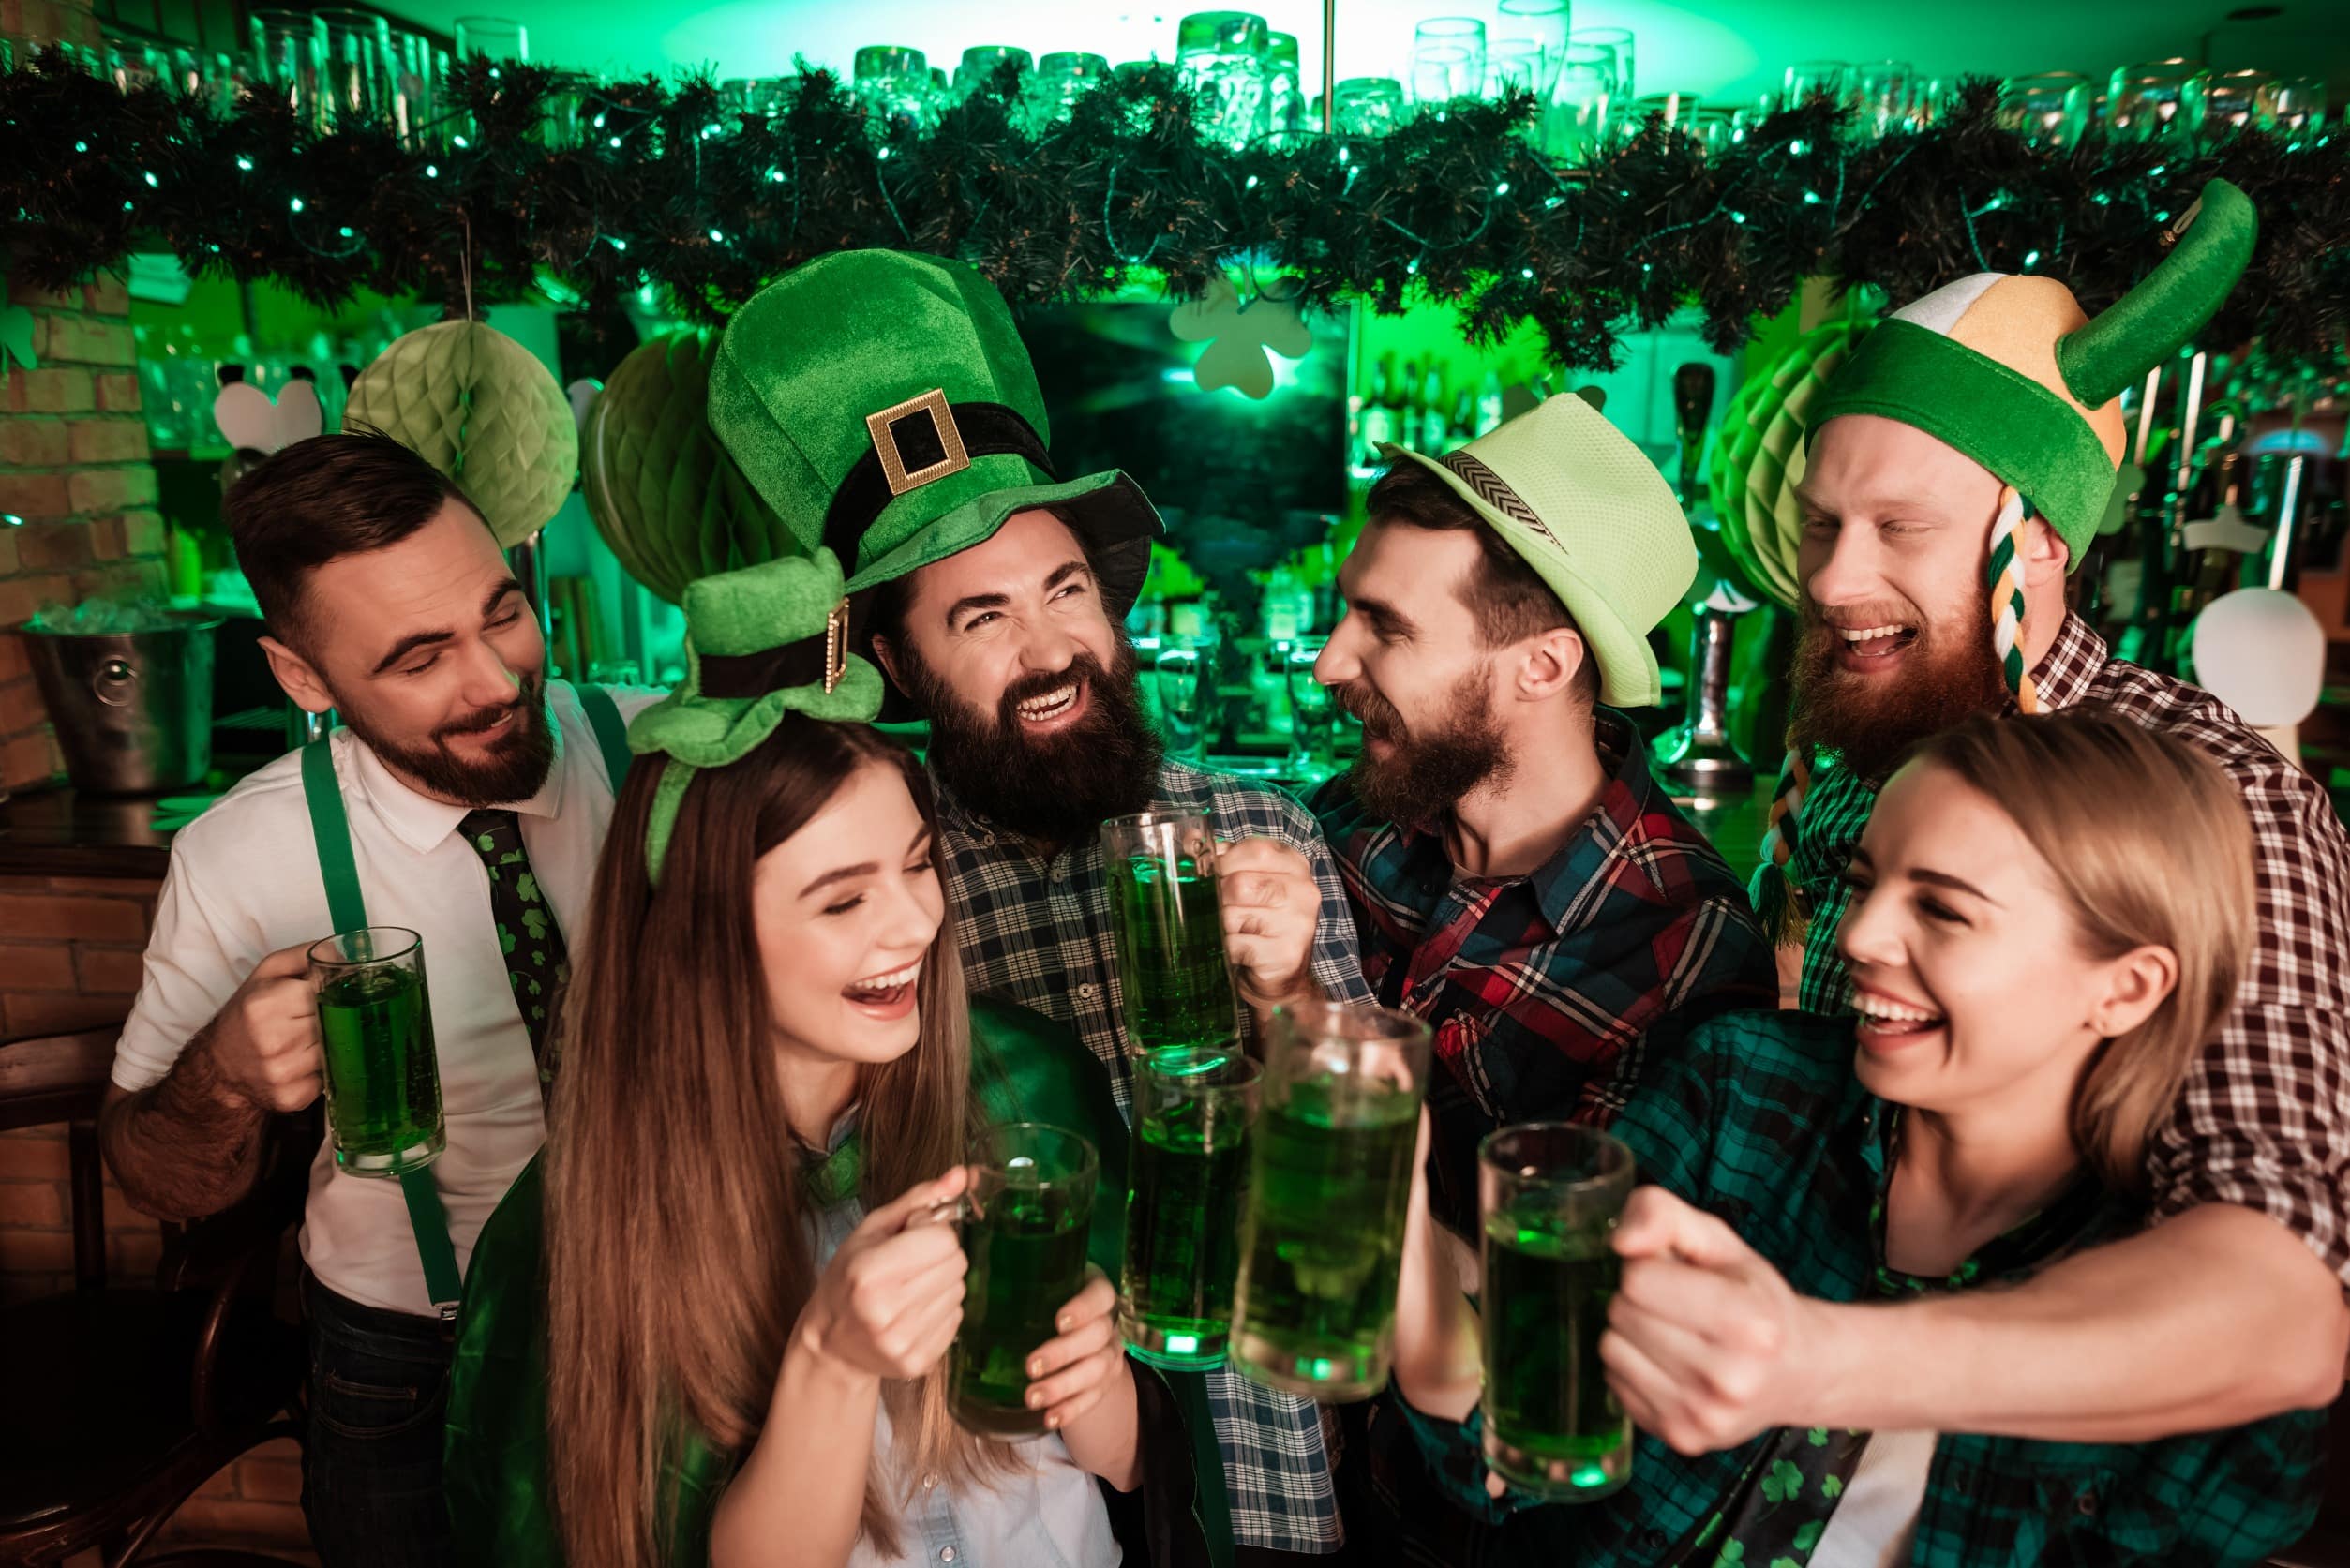 Injured at a St. Patrick’s Celebration? Know Your Rights